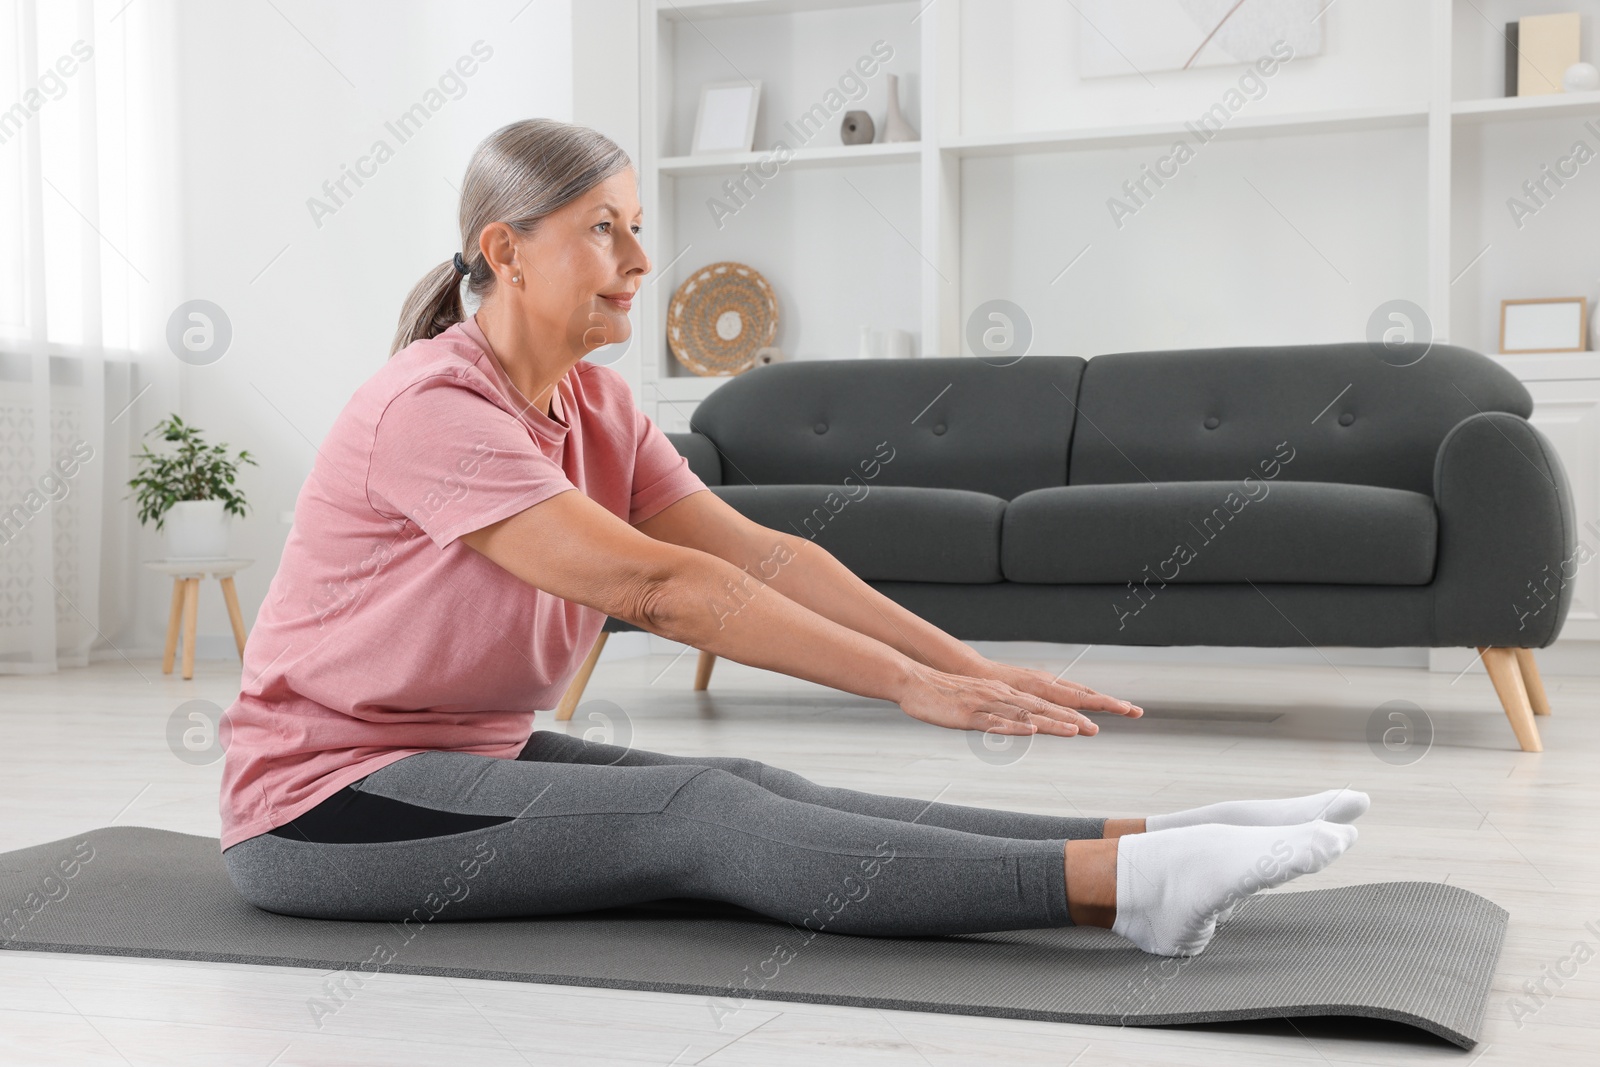 Photo of Senior woman in sportswear stretching on fitness mat at home